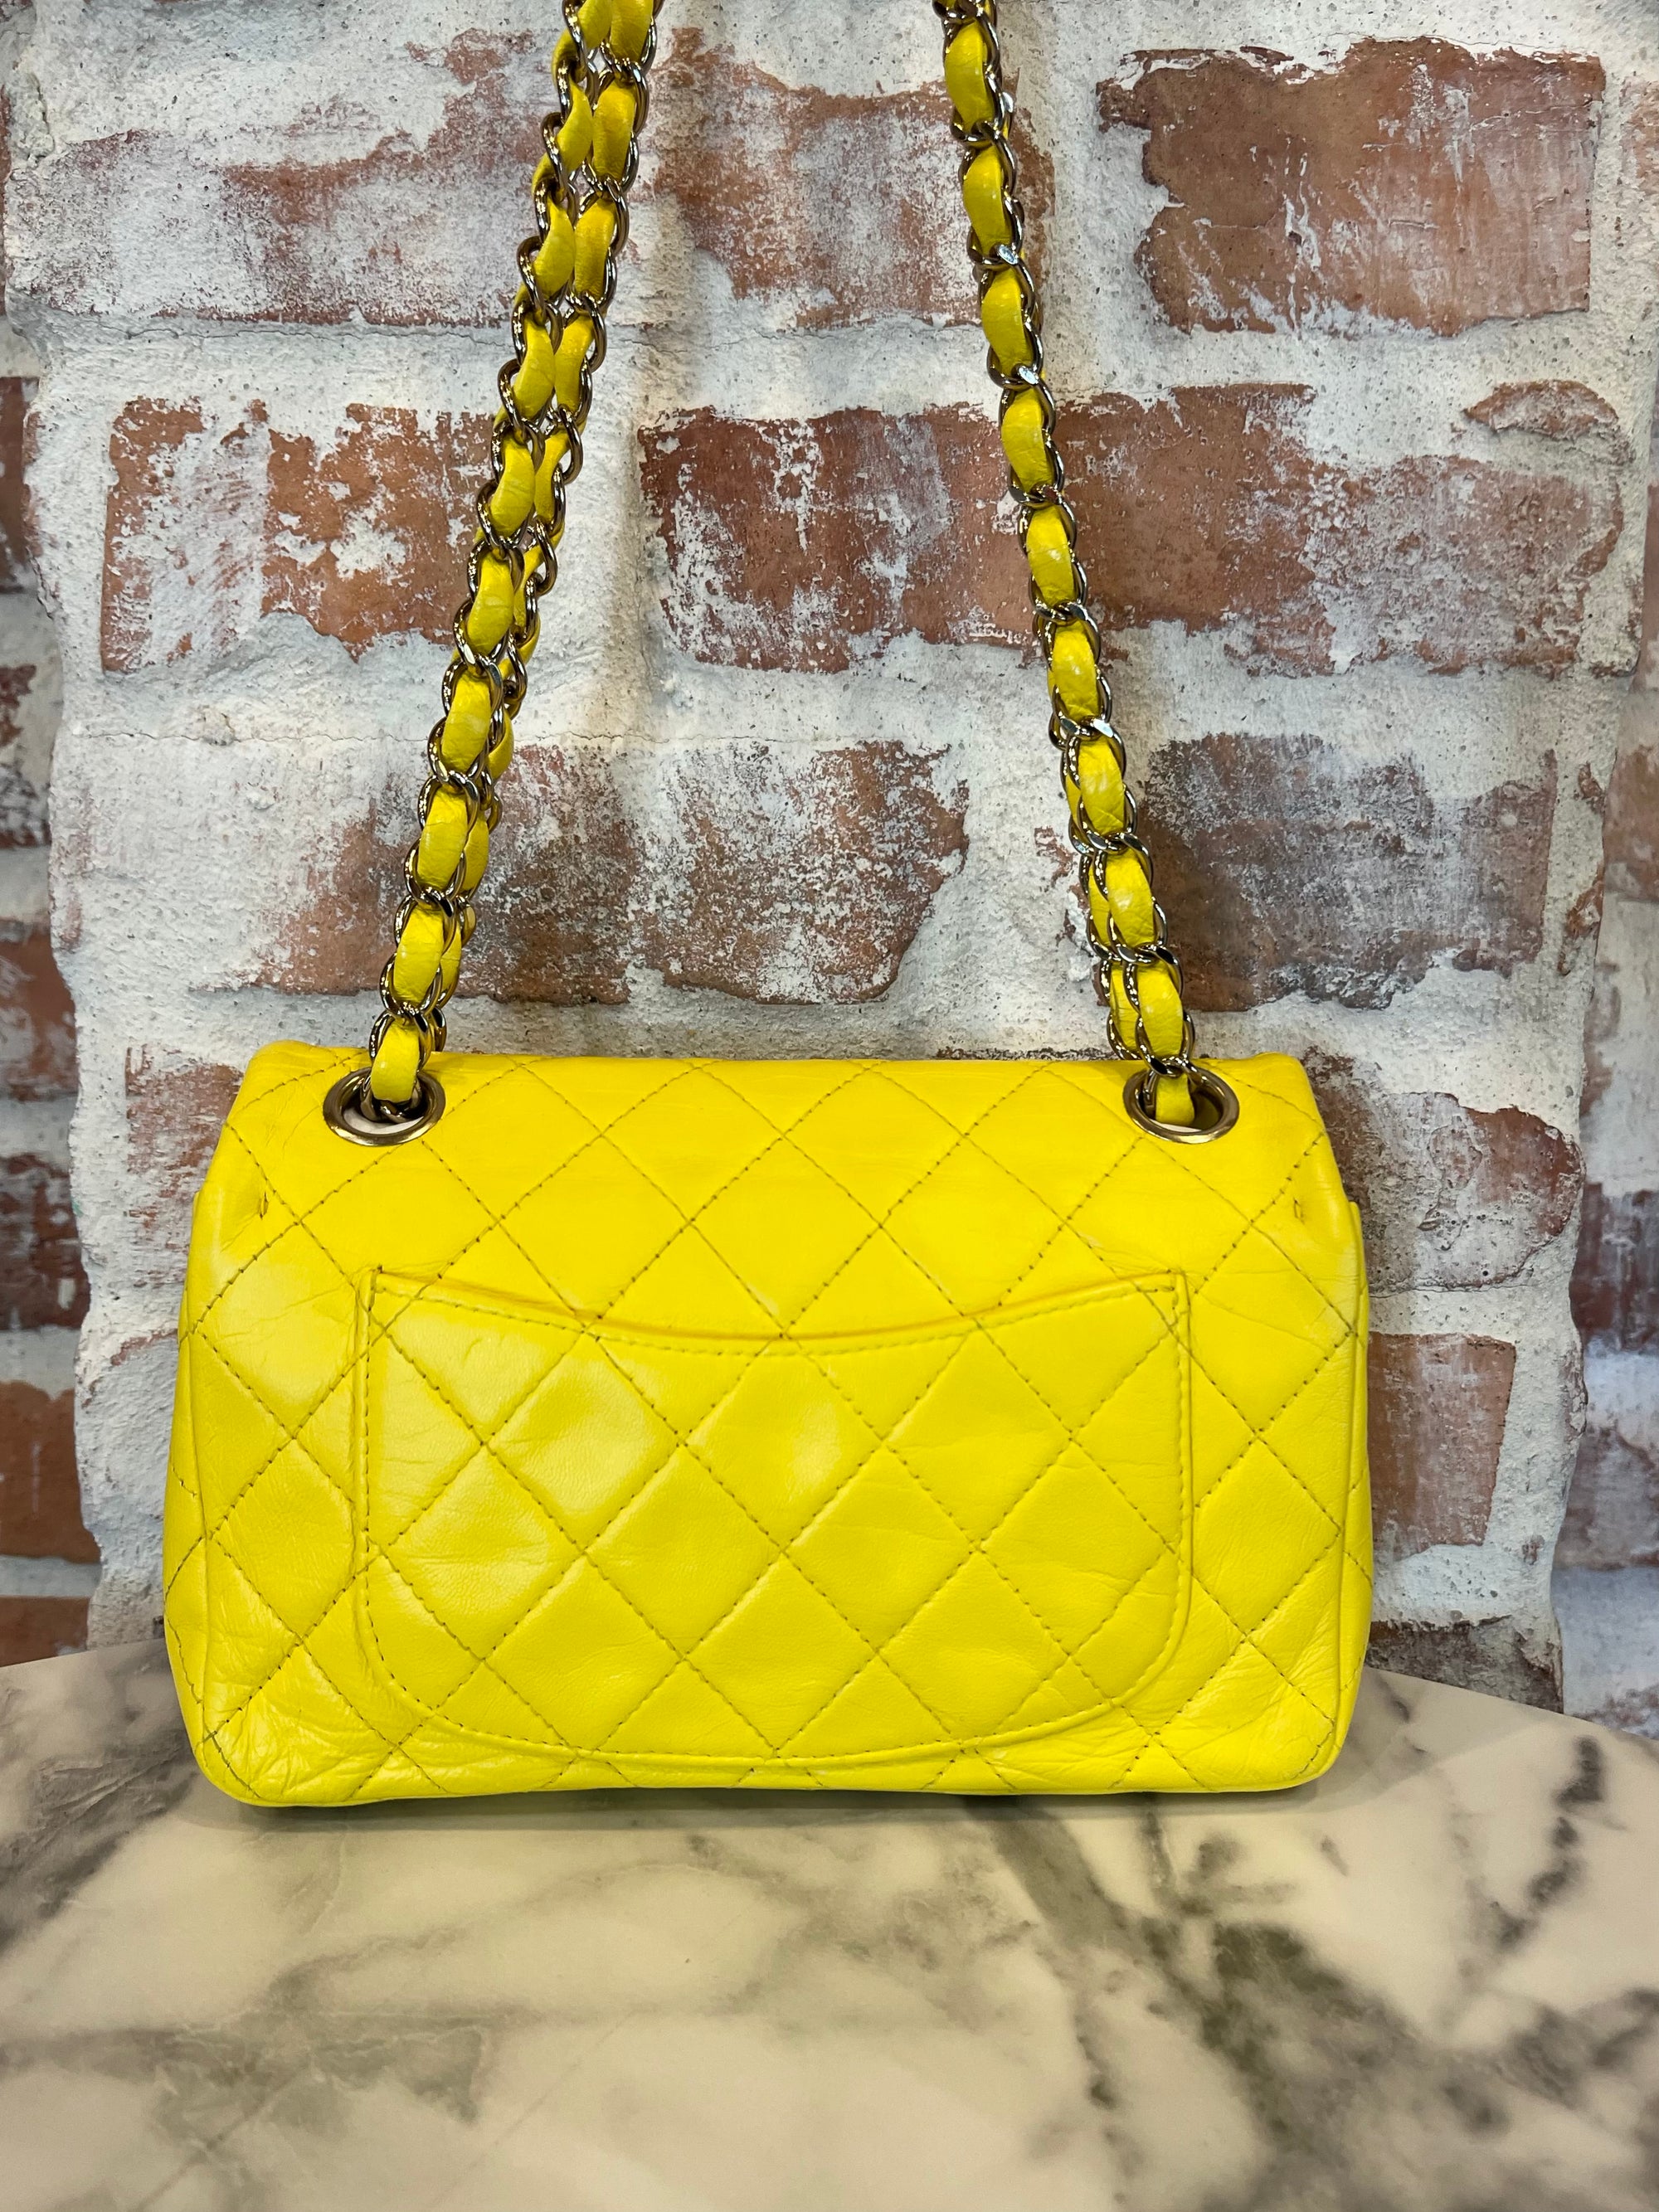 CHANEL Neon Yellow Leather Small Flap Shoulder Bag TS3168